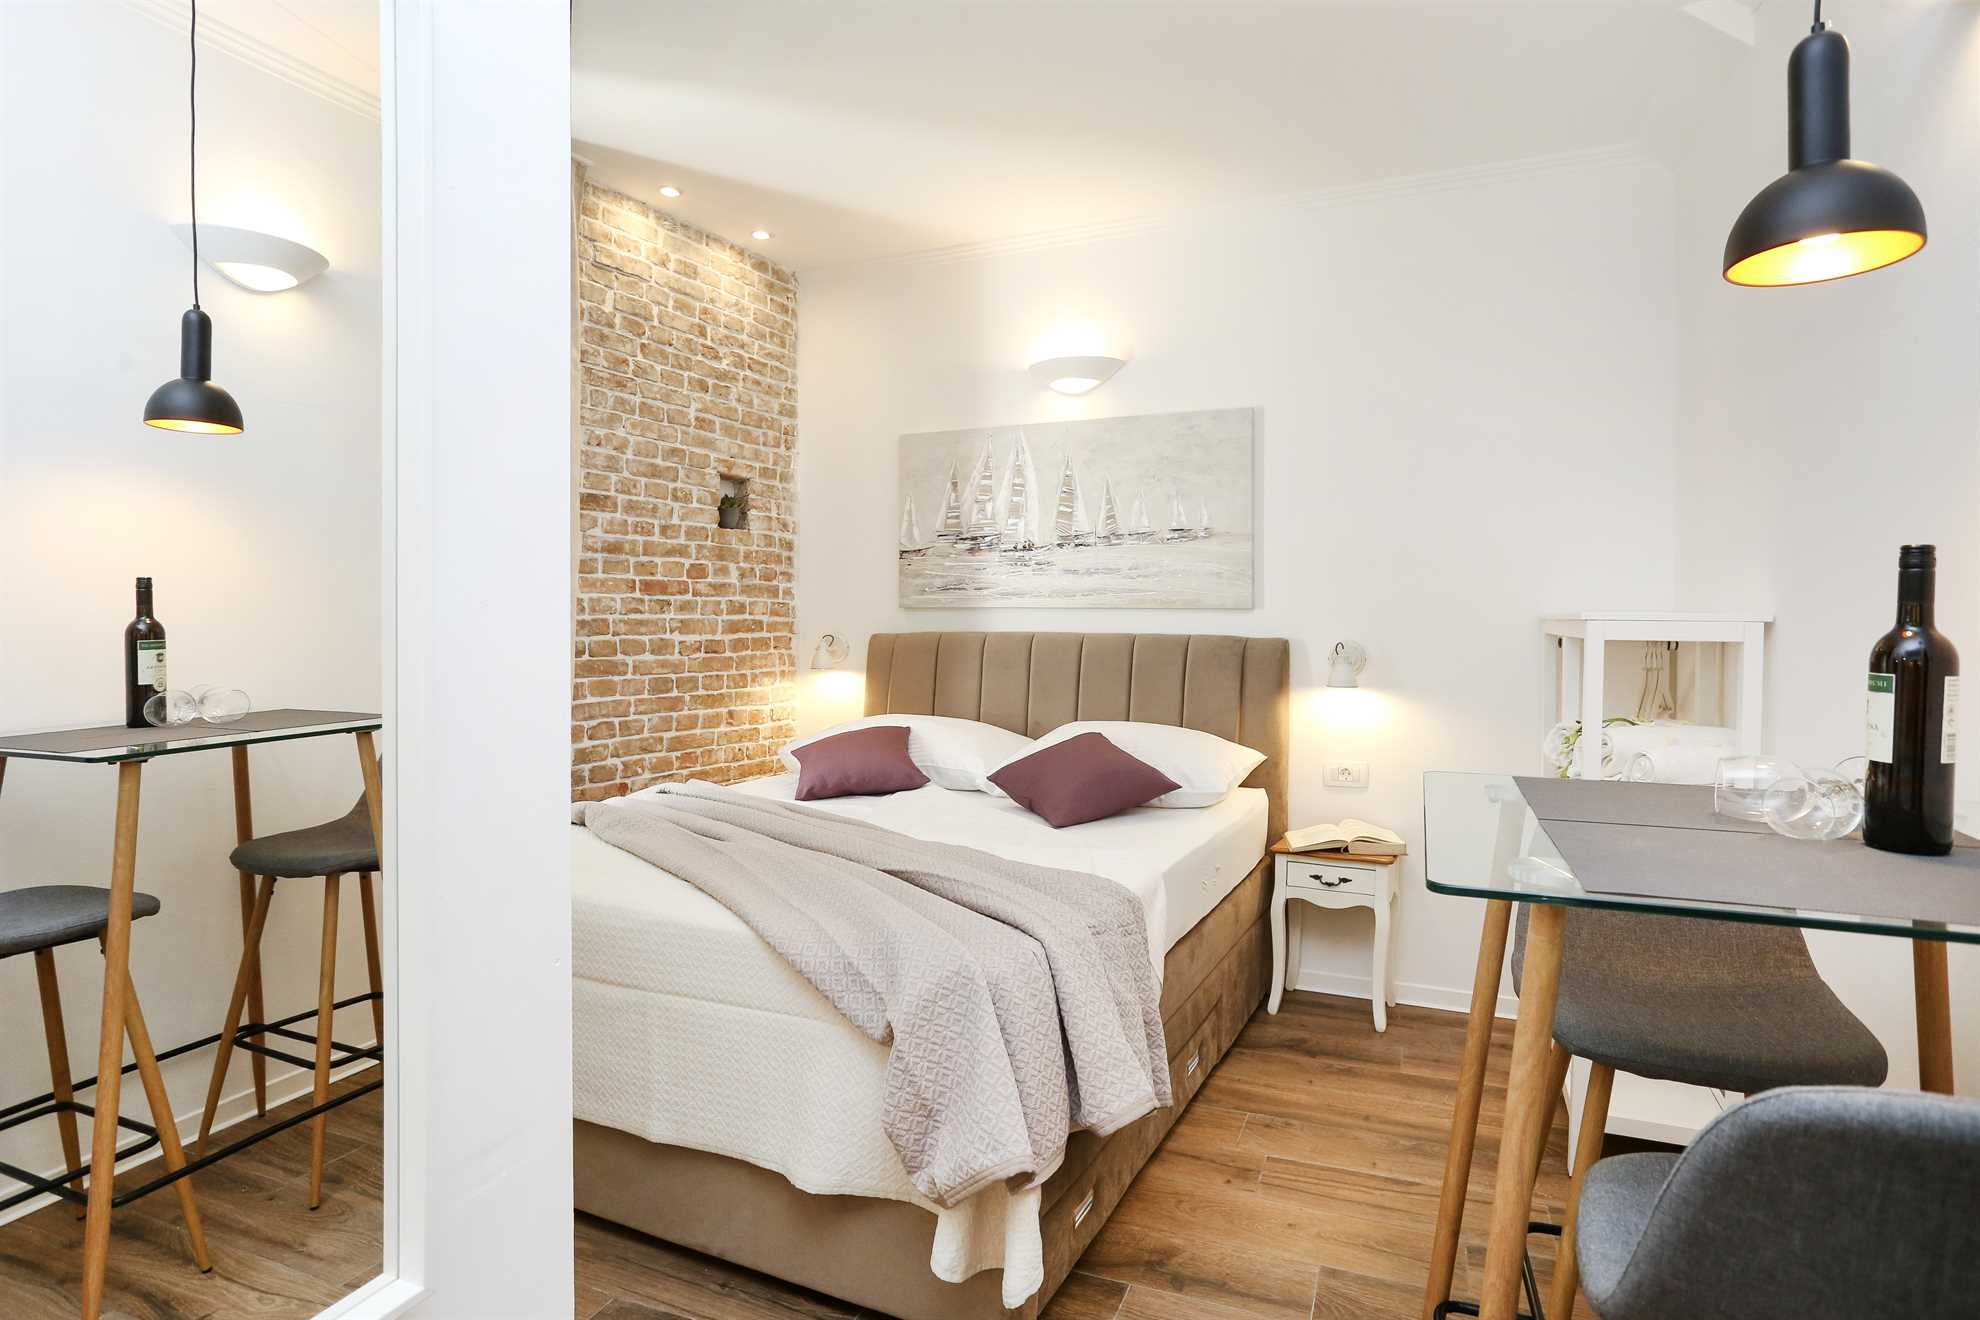 Luxury studio apartment in the Old town, Monfrina 2